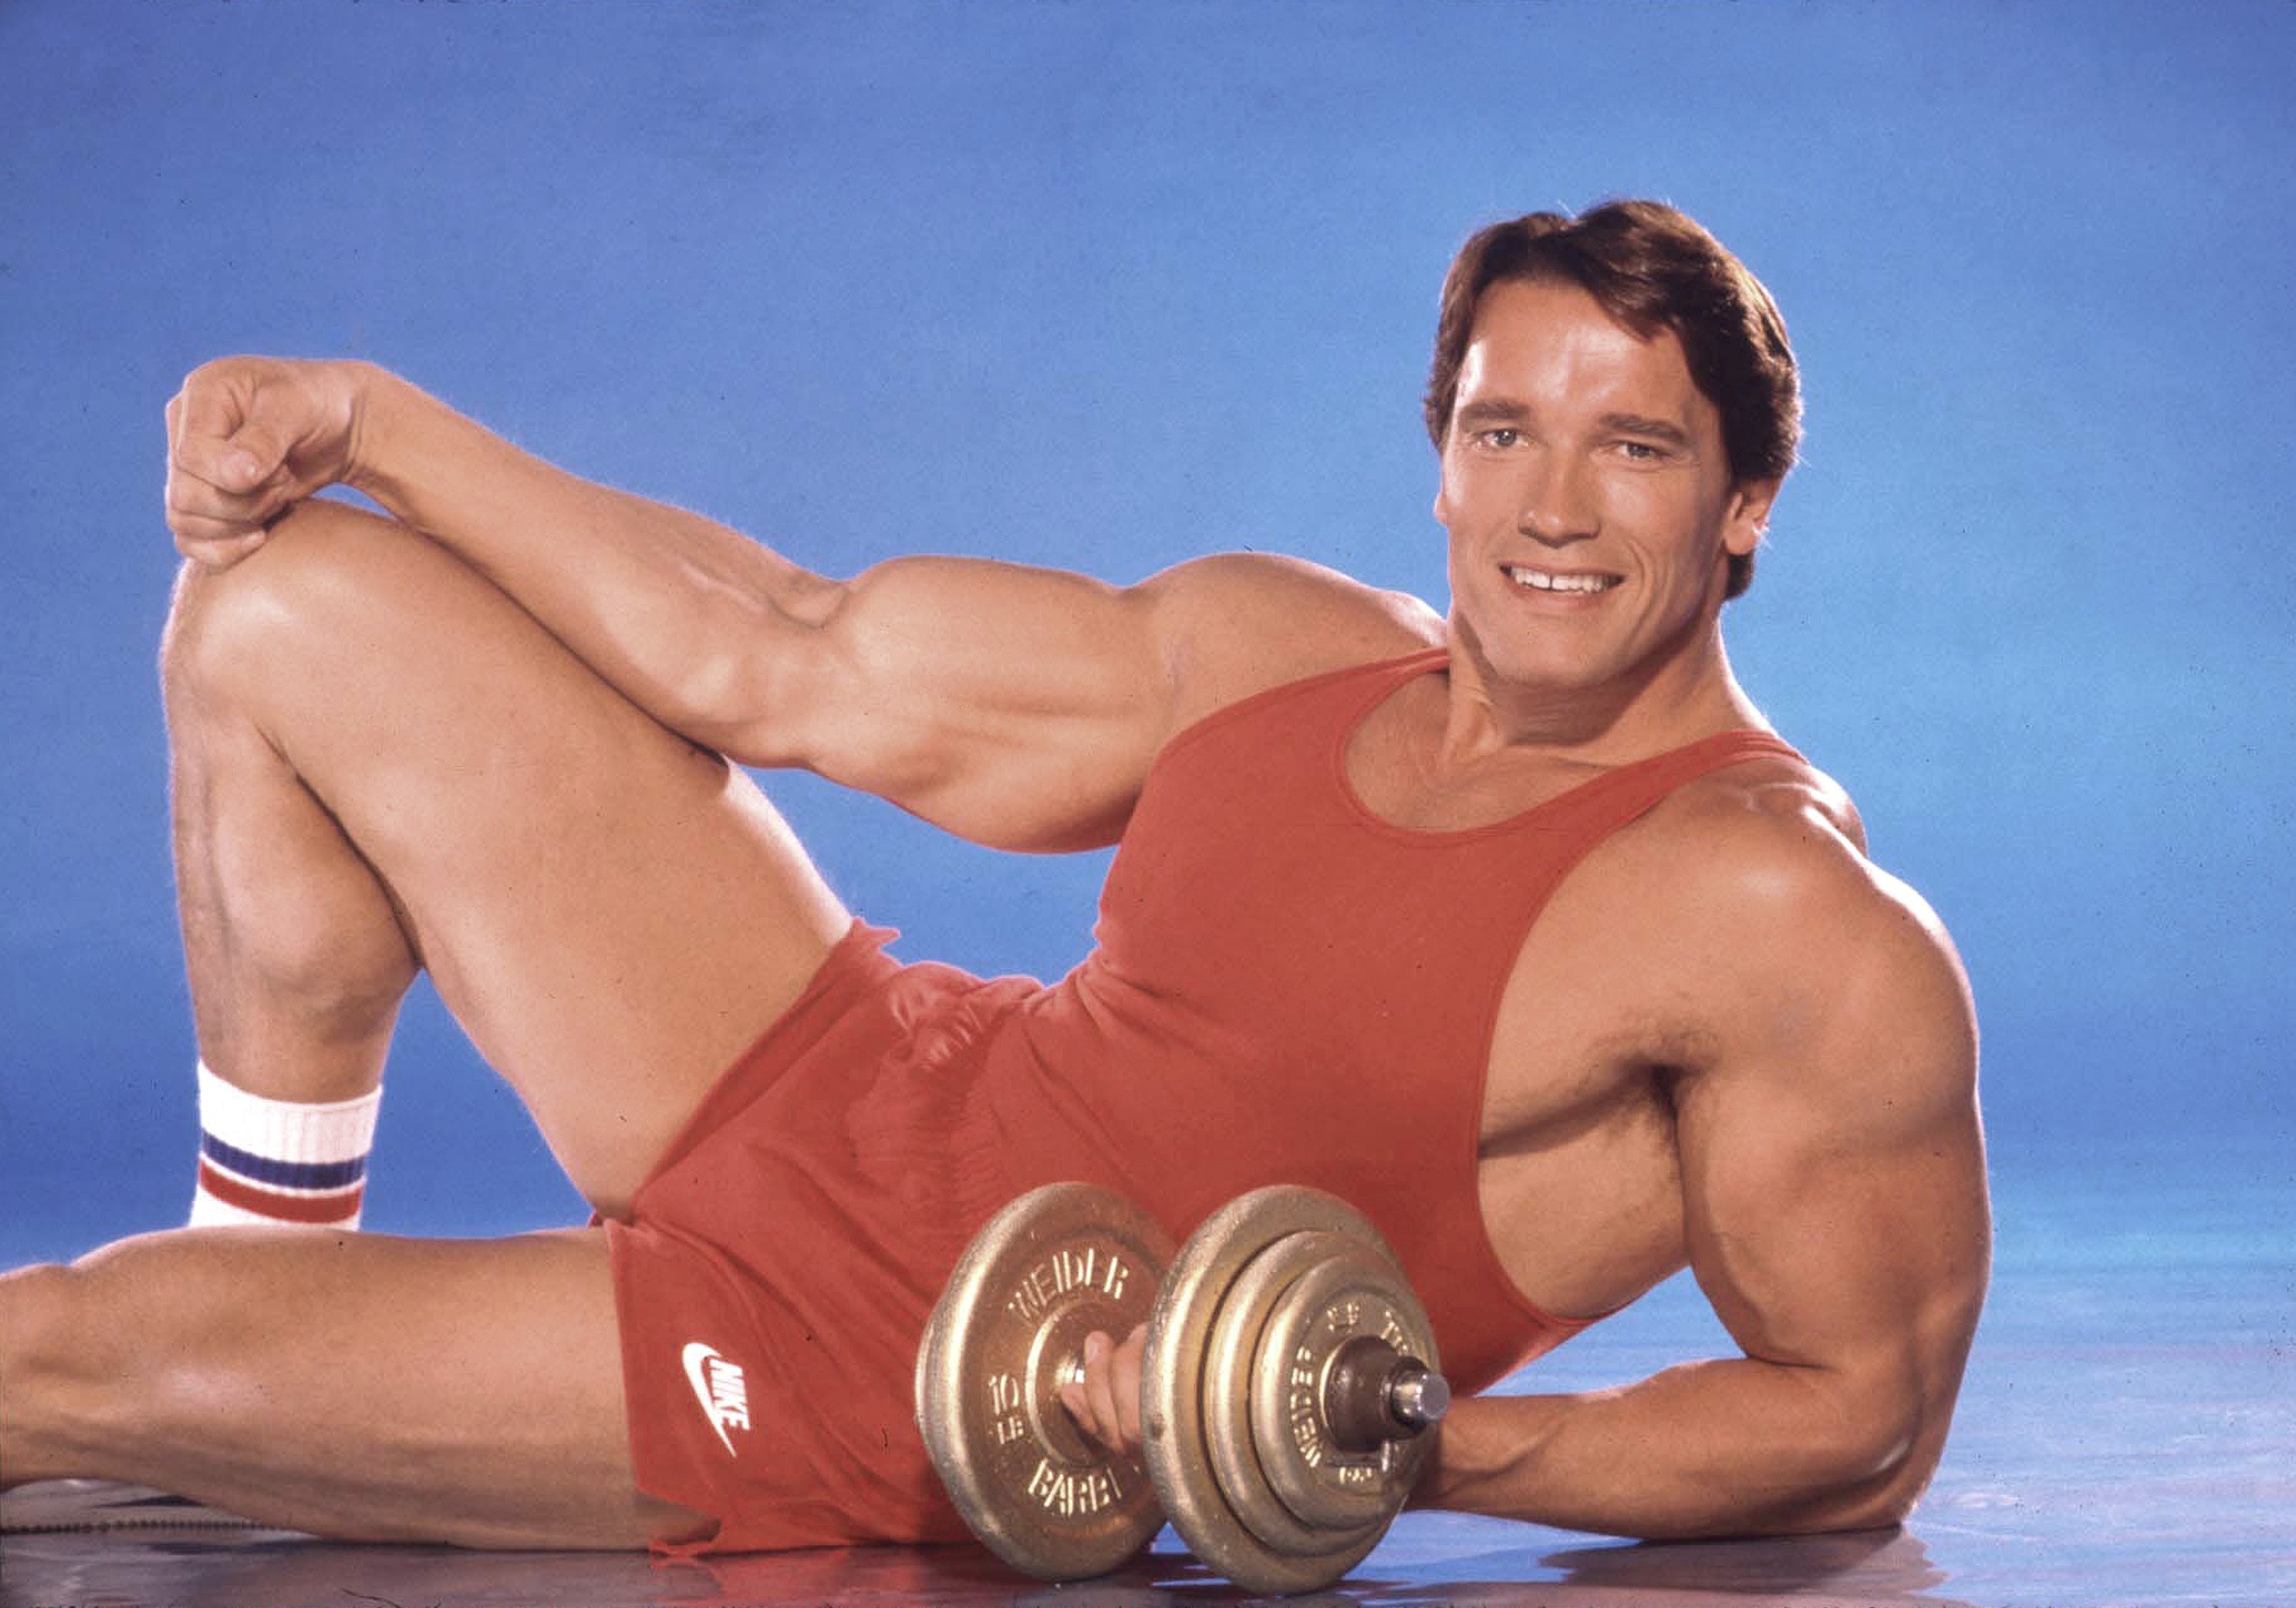 Arnold Schwarzenegger poses for a portrait session in Los Angeles, California on June 13, 1985 | Source: Getty Images